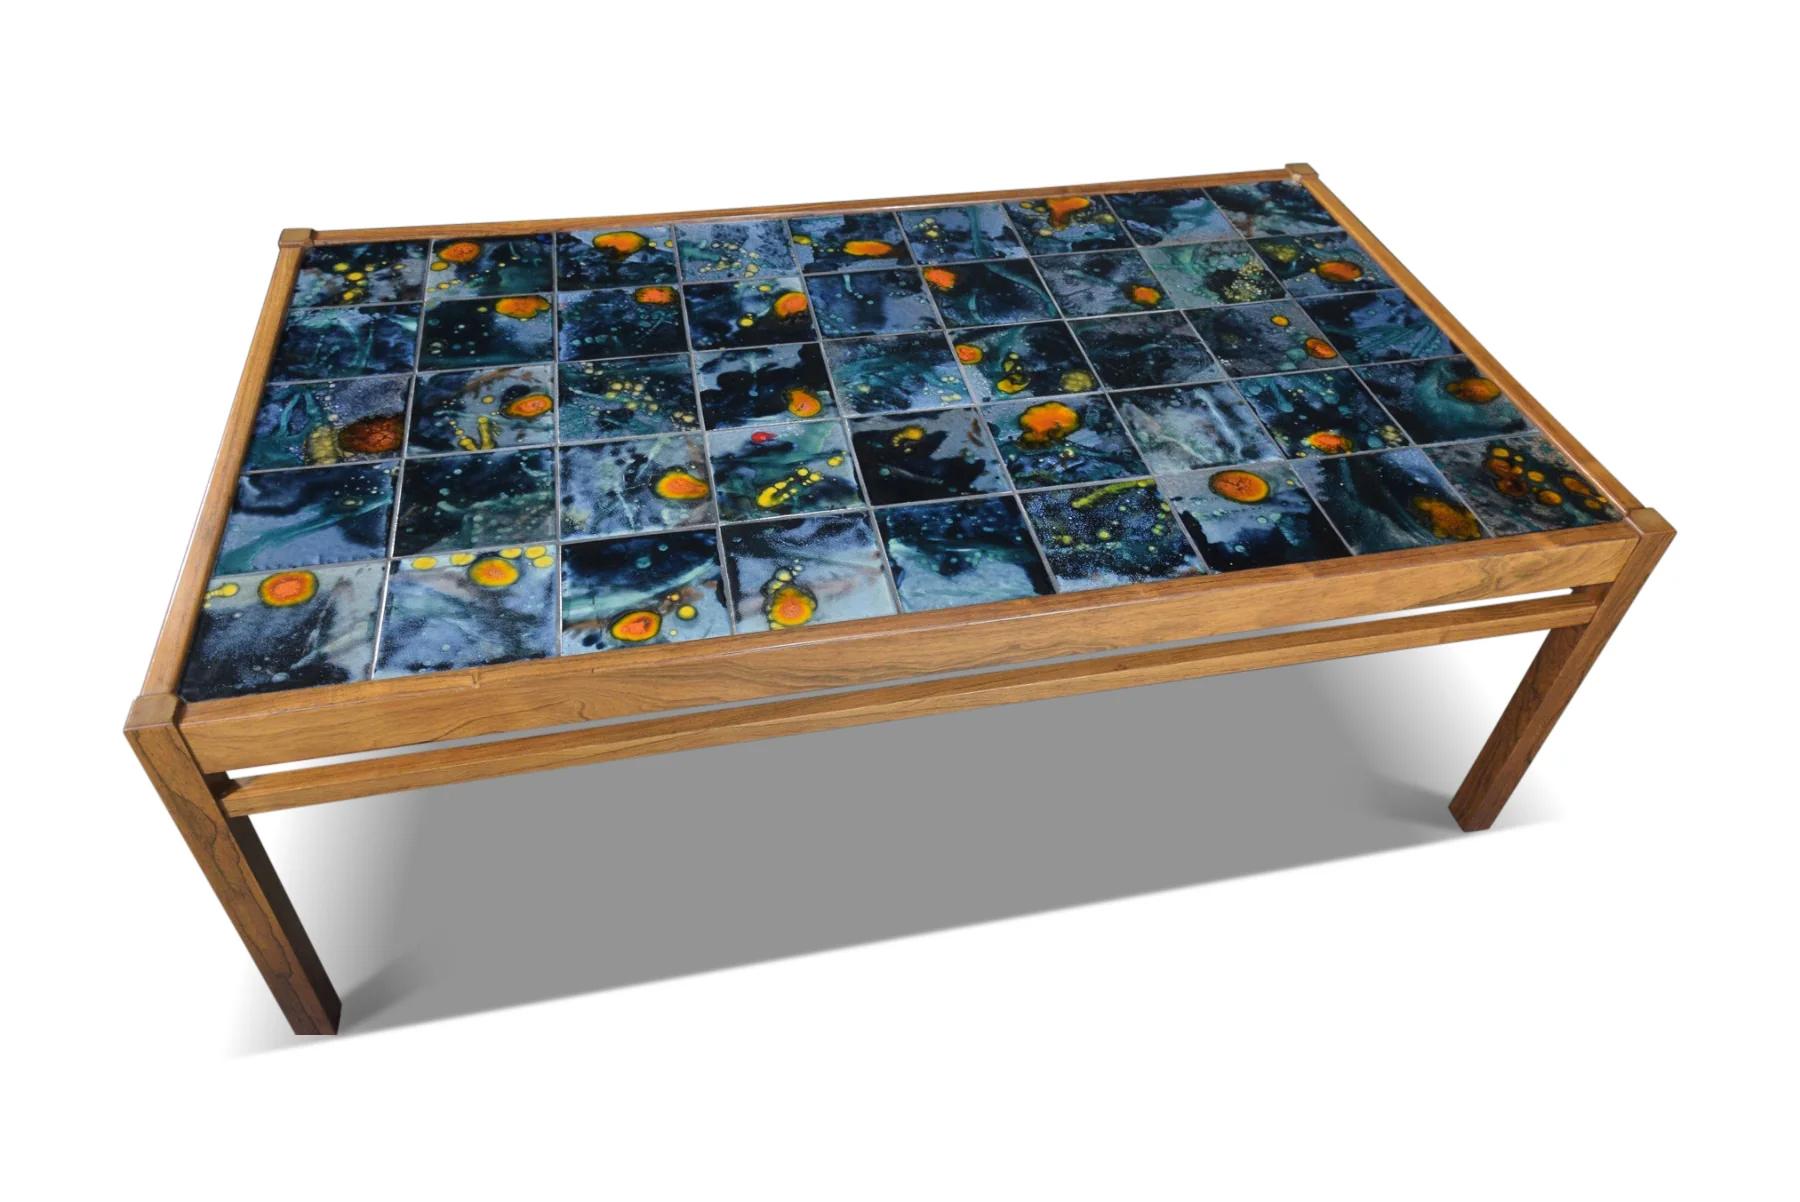 1960s rosewood + ceramic tile coffee table In Good Condition For Sale In Berkeley, CA